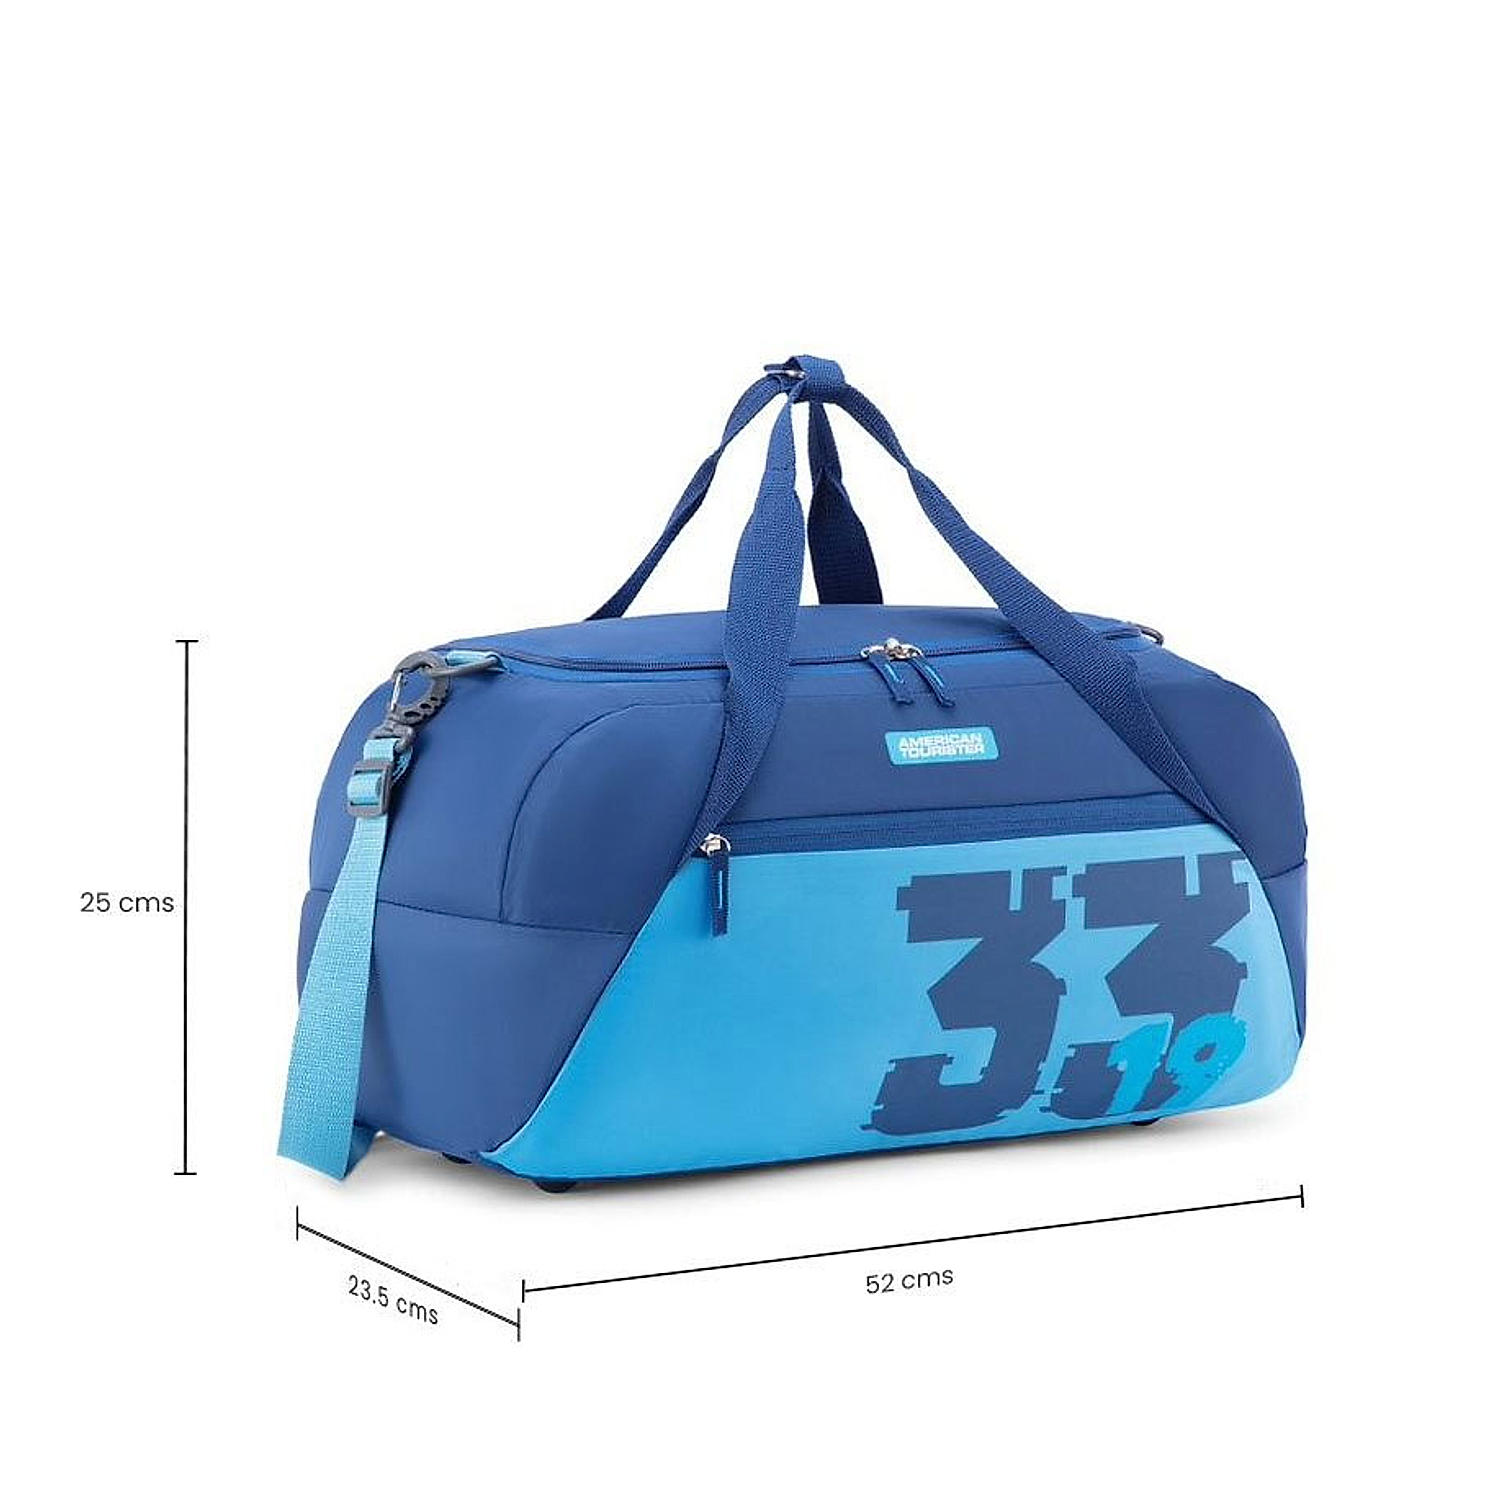 Buy Blue Covo Duffle Cabin (52 cm) for Travel Online at American ...